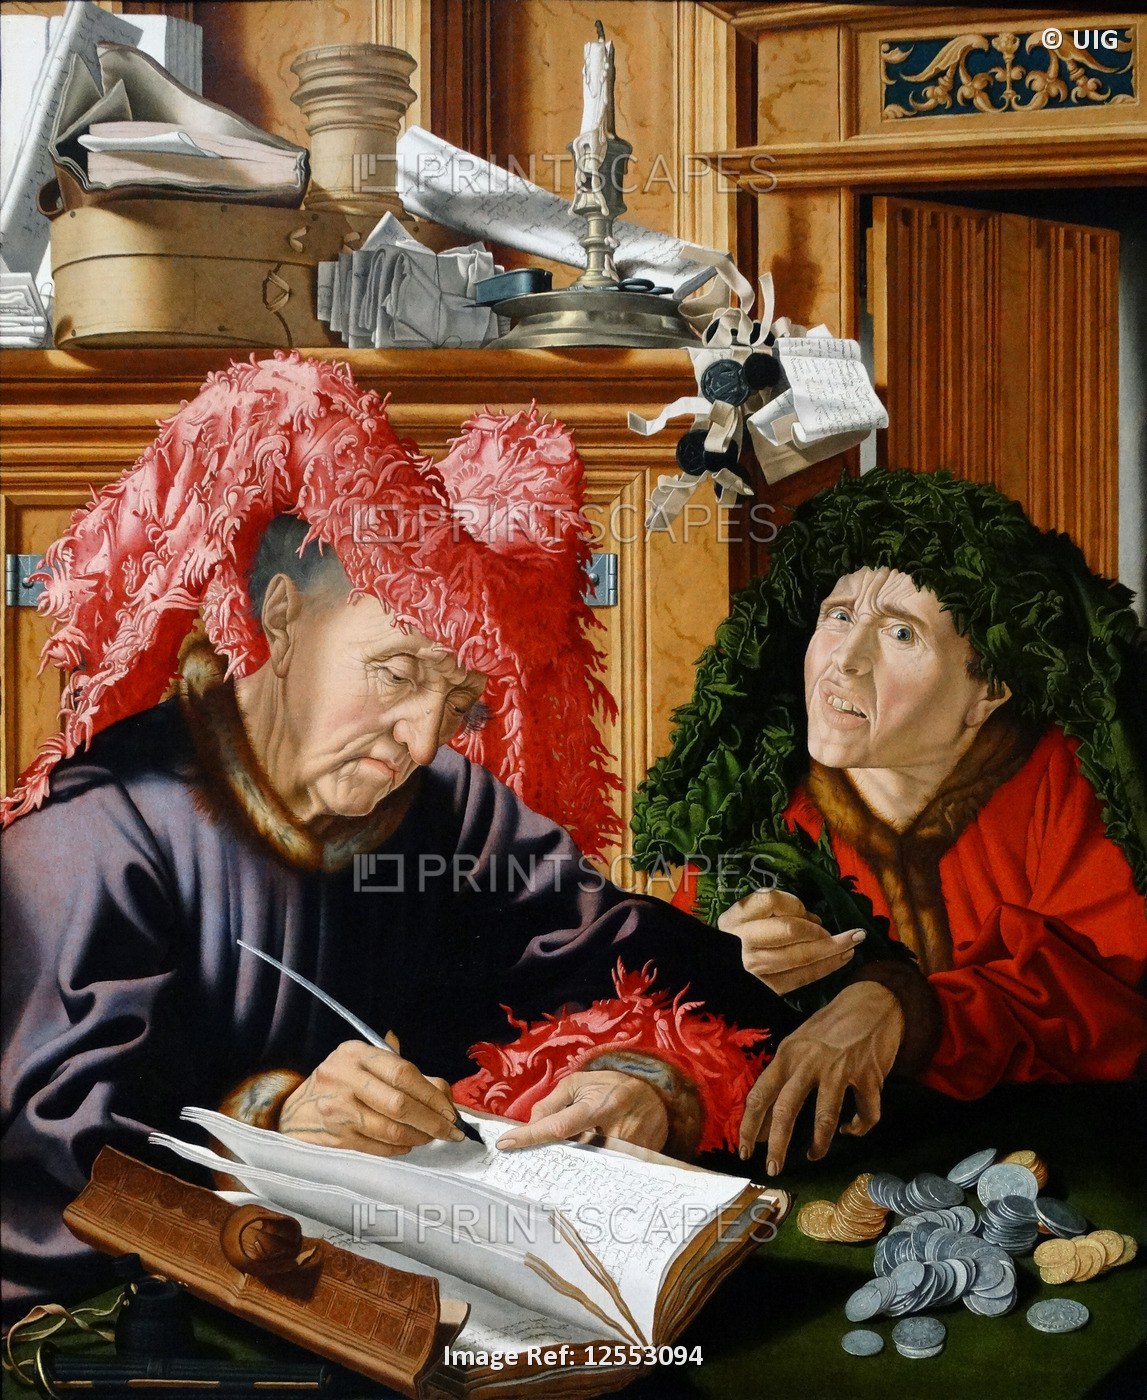 Painting titled 'Two TaxGatherers' by Marinus van Reymerswaele, 16th century